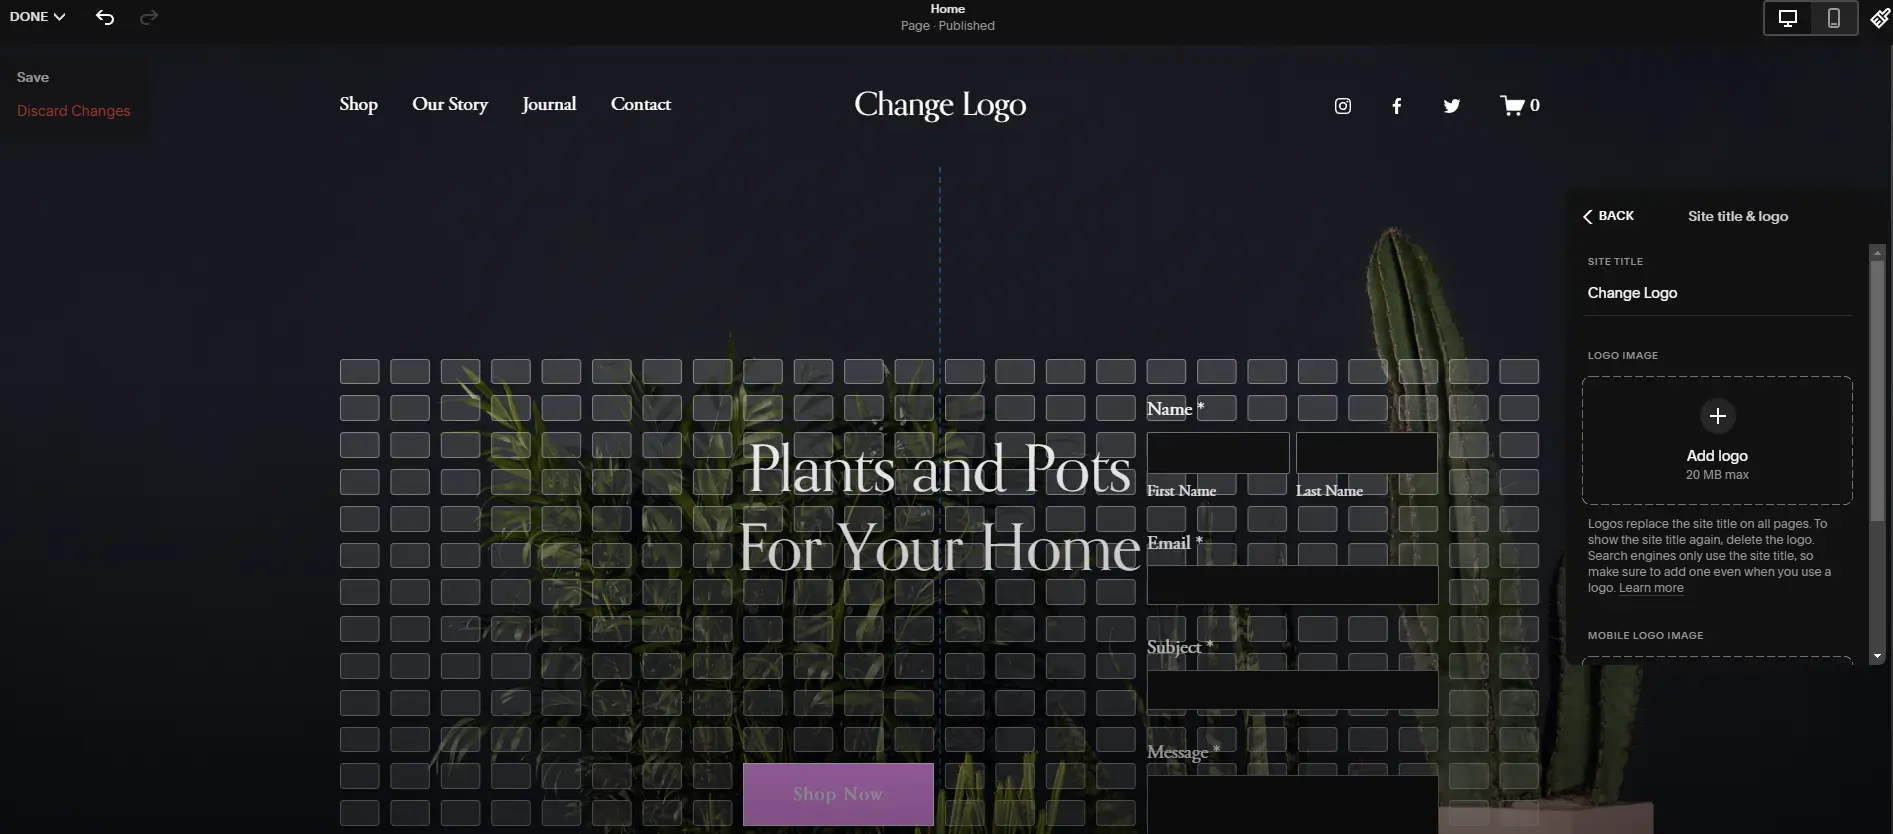 This is how to edit header in squarespace